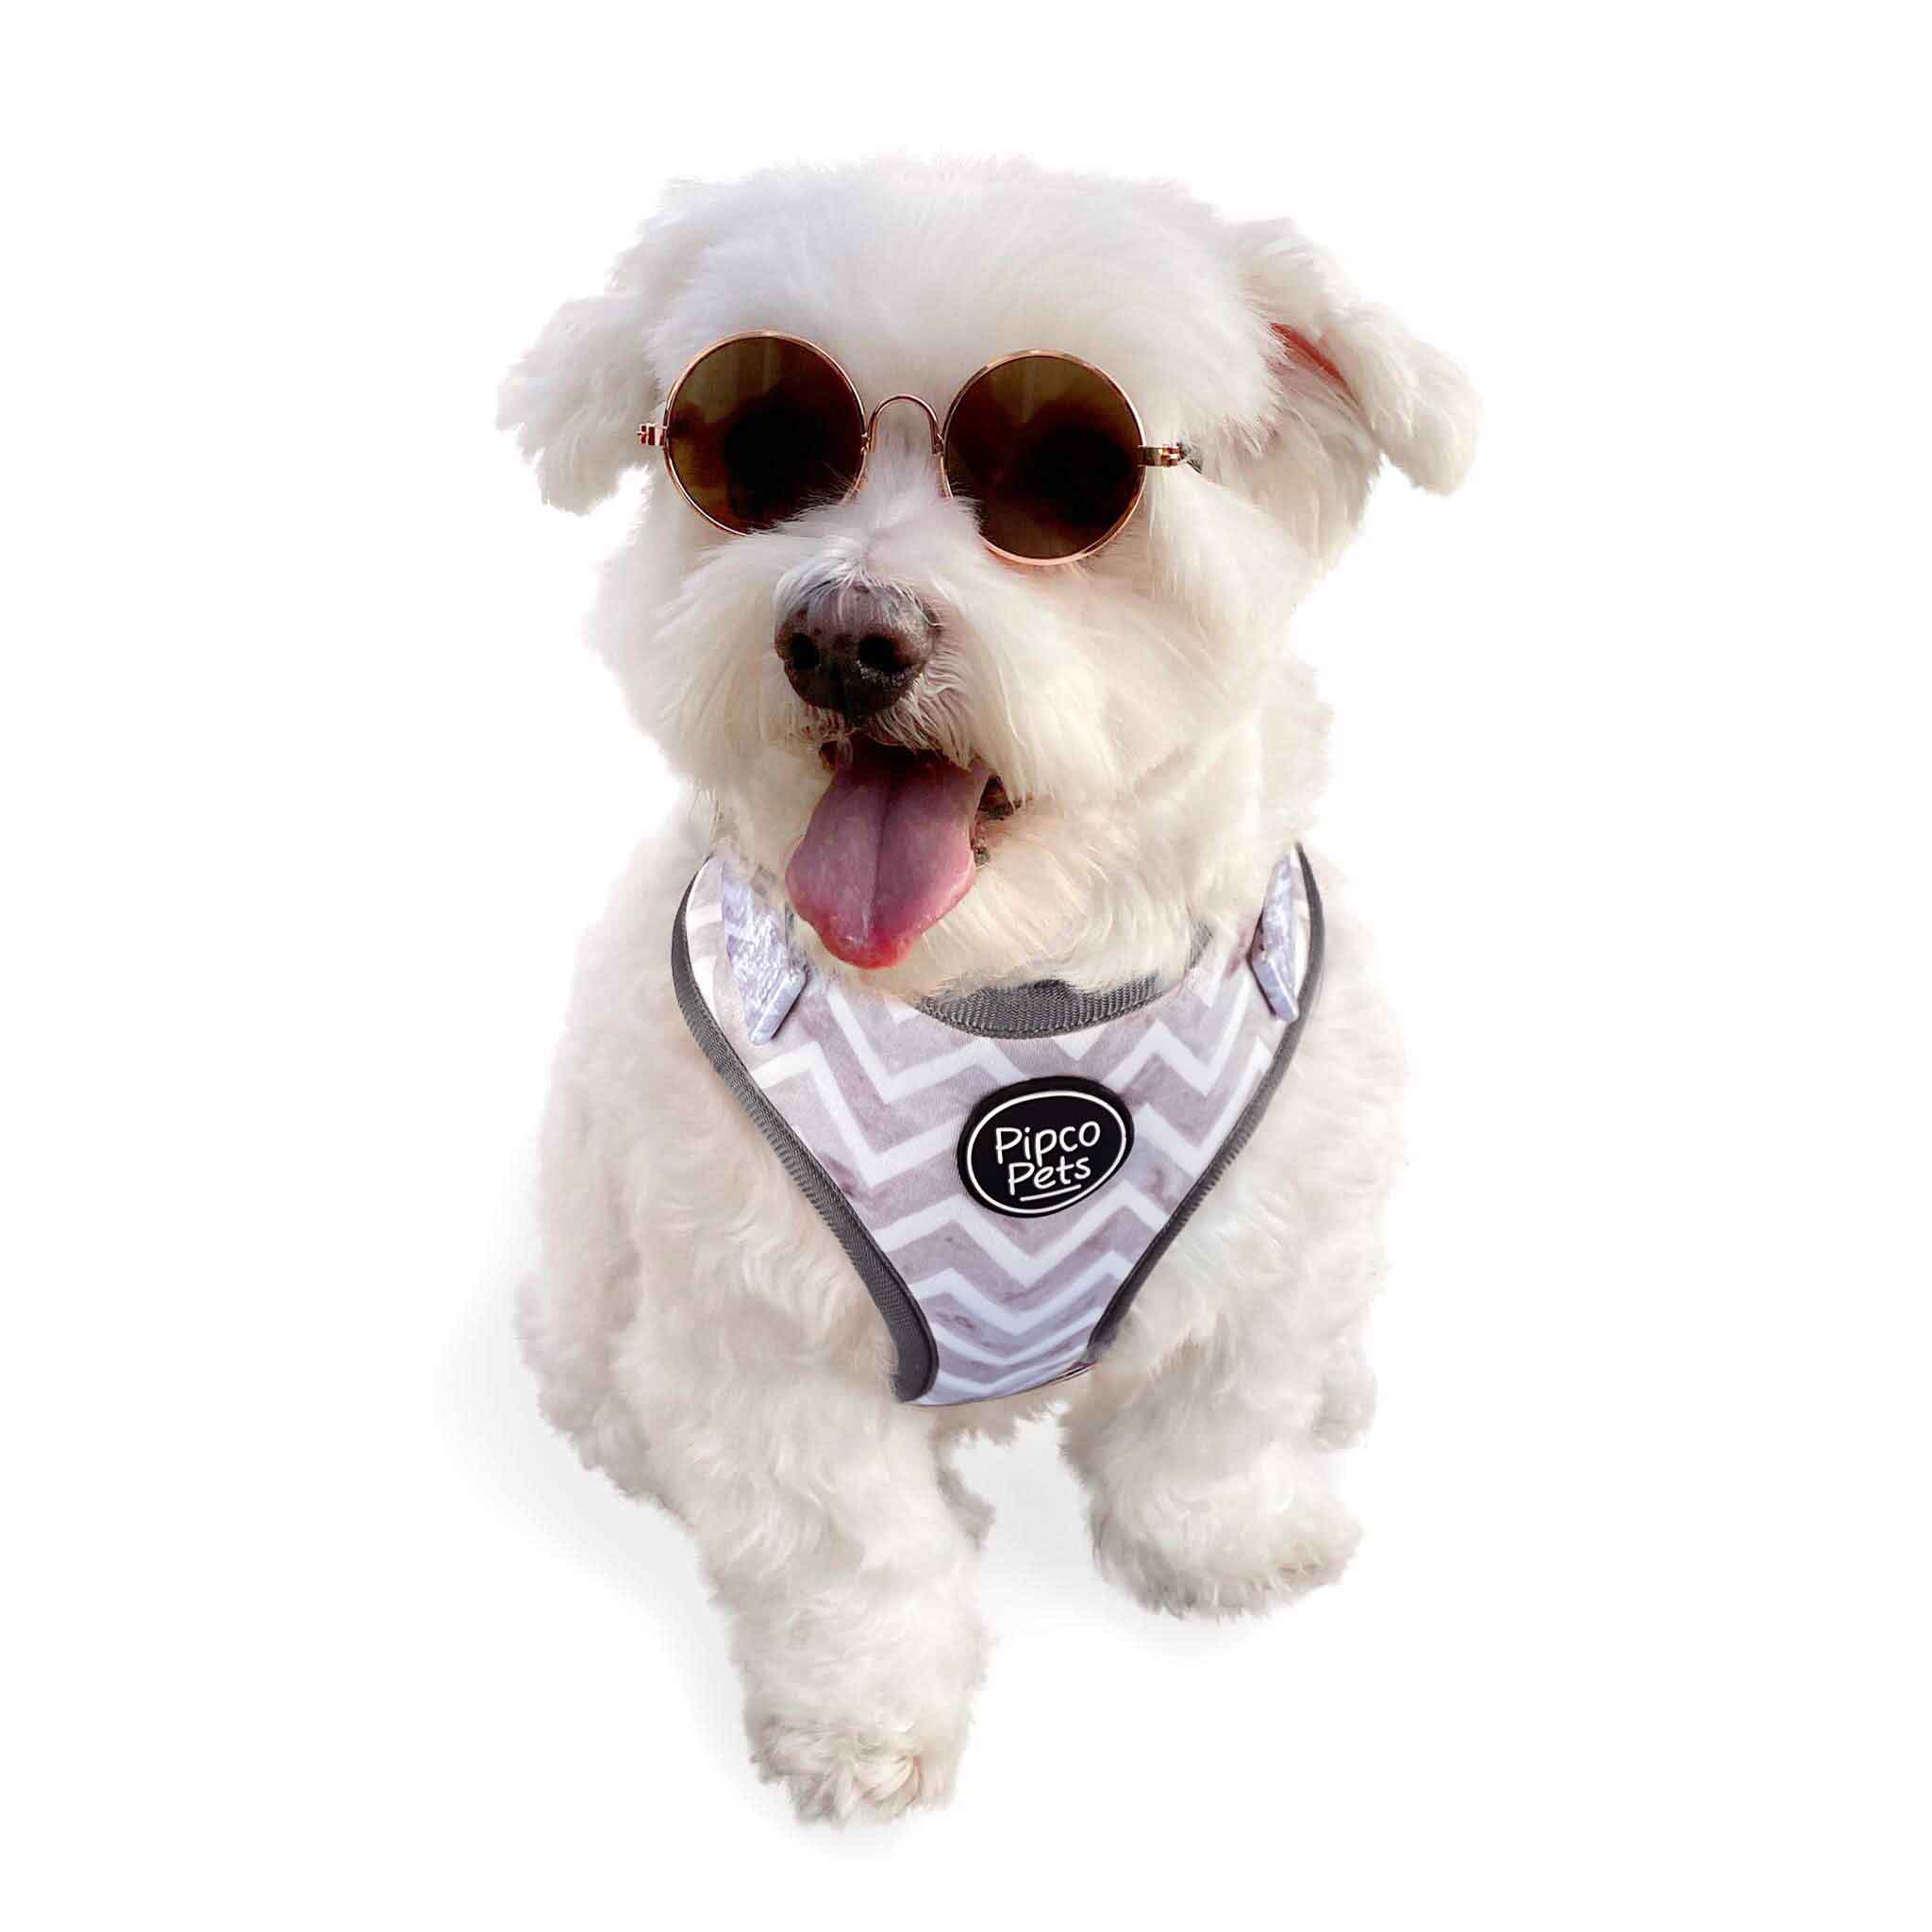 Cute dog wearing sunglasses and Pipco Pets adjustable harness with gray Zig Zags pattern